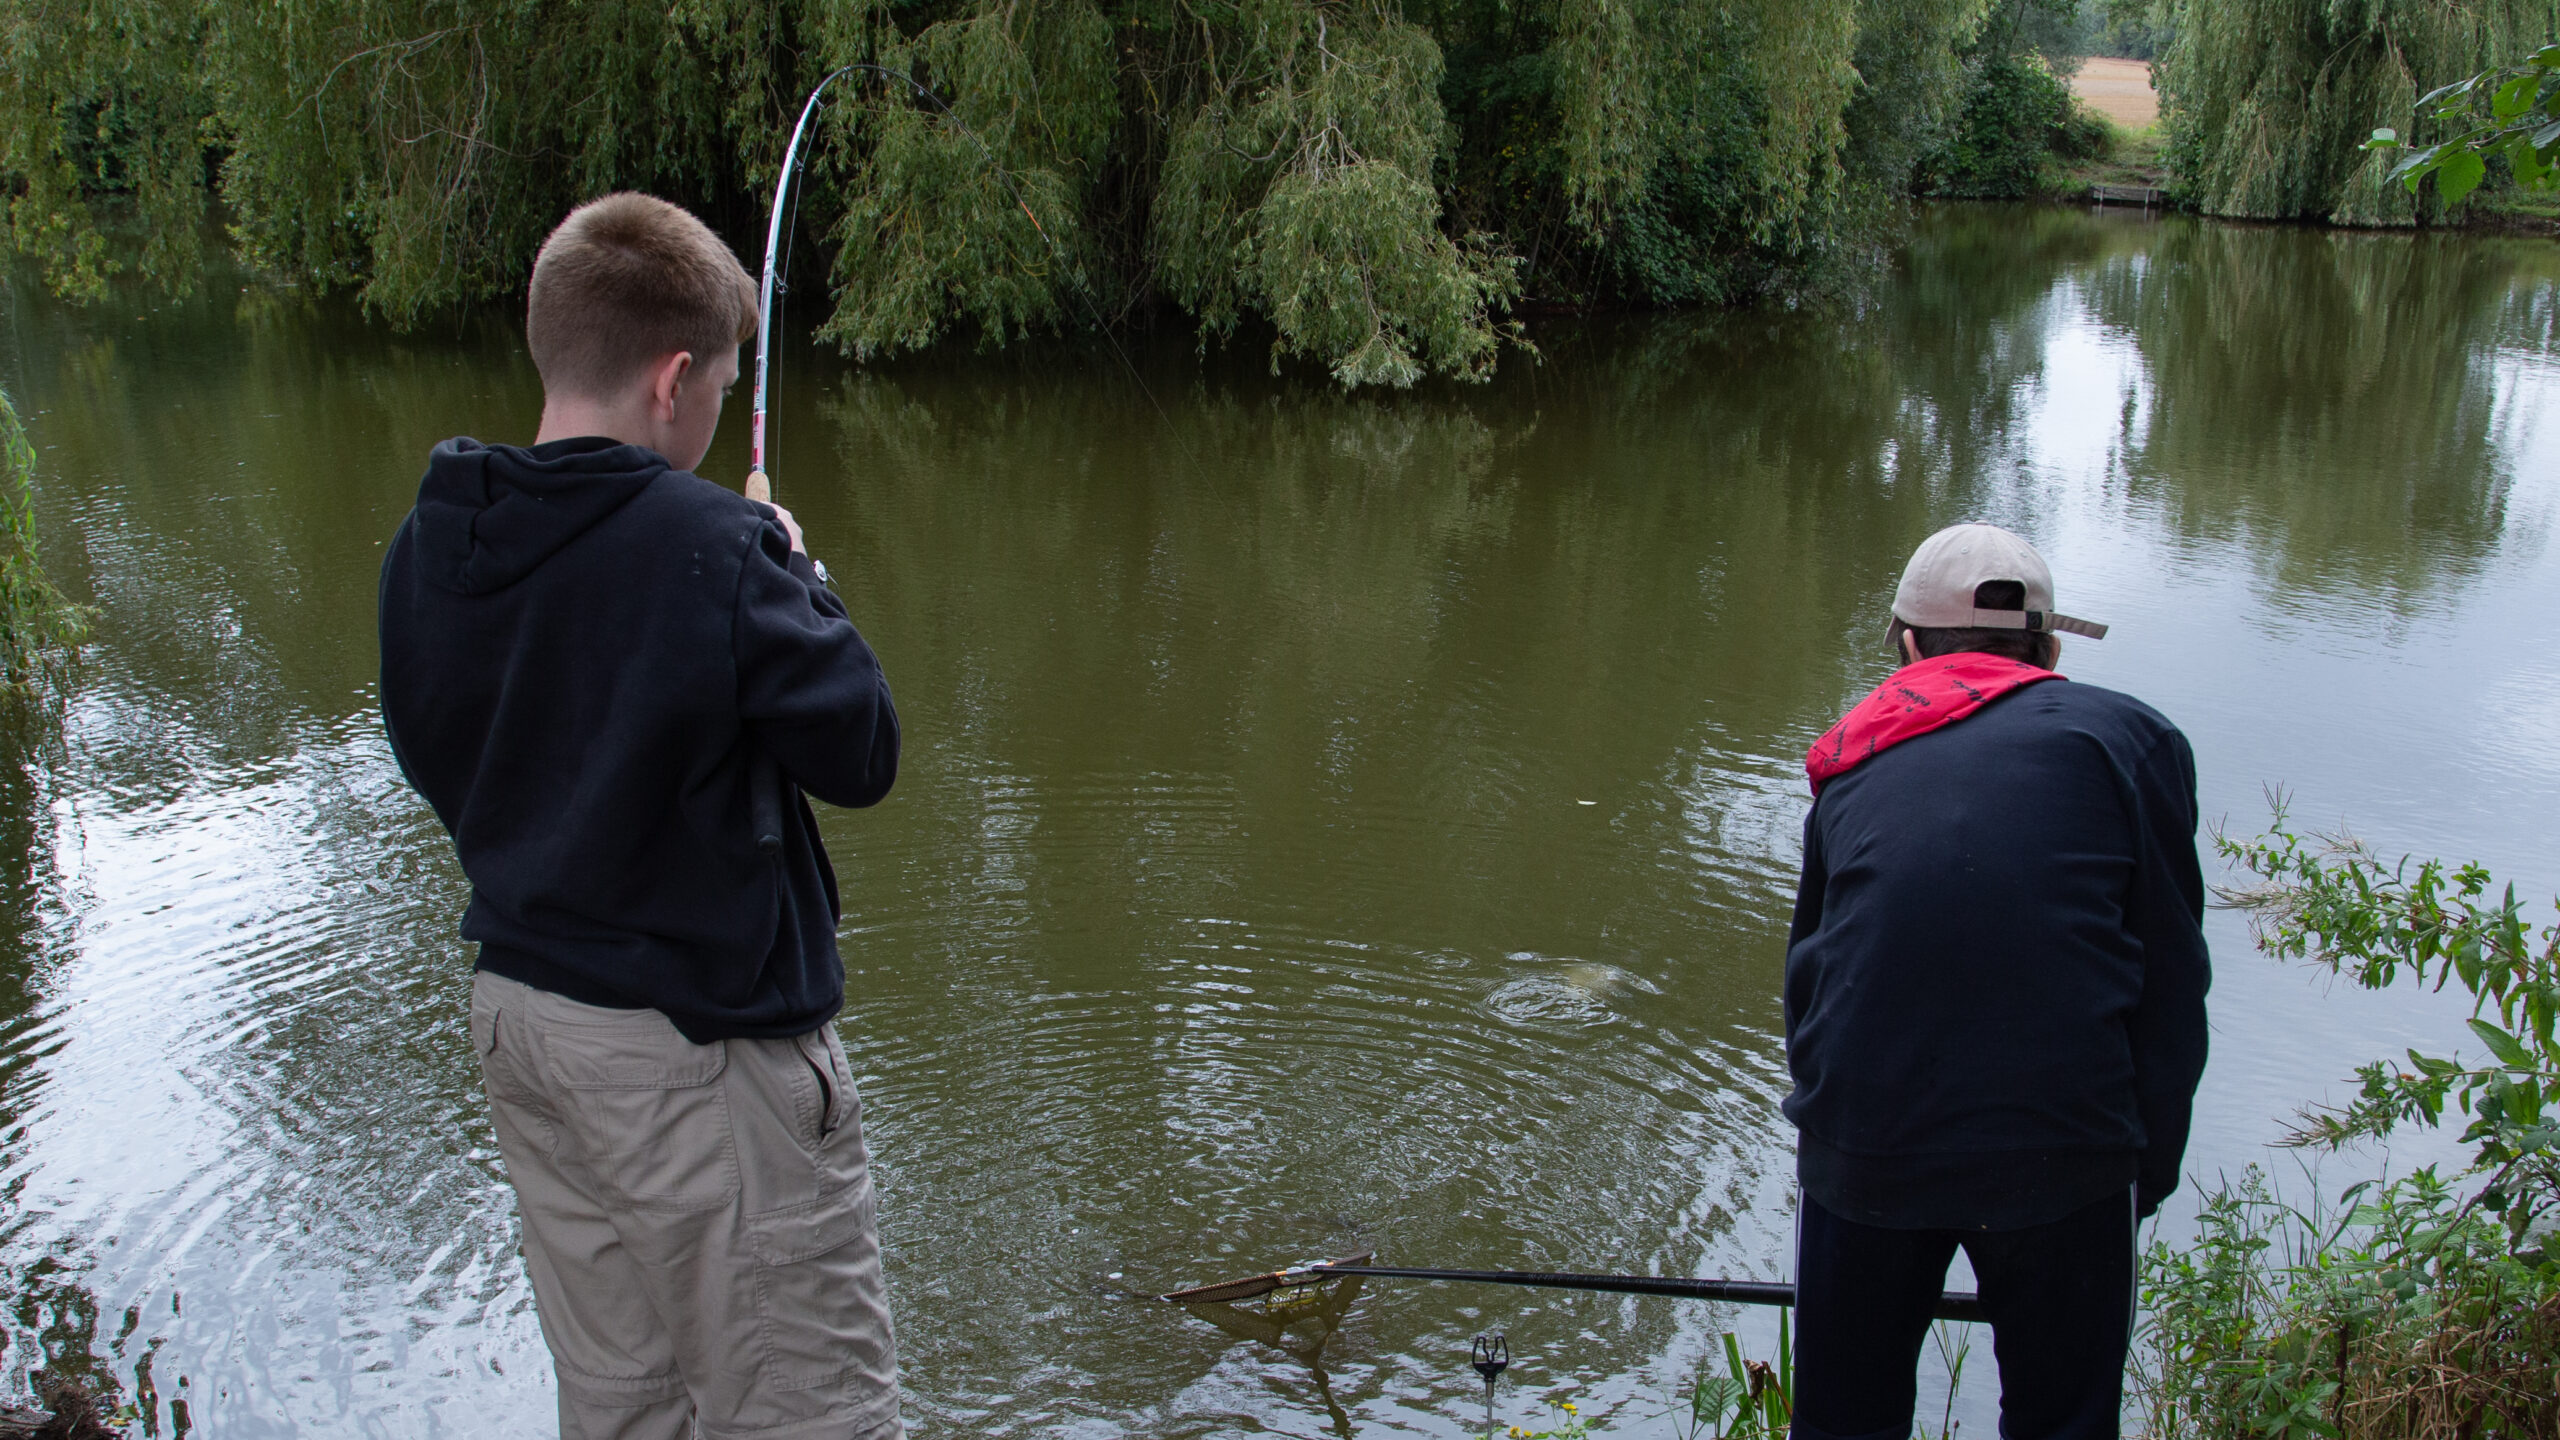 Two boys fish in front of a pond surrounded by green trees